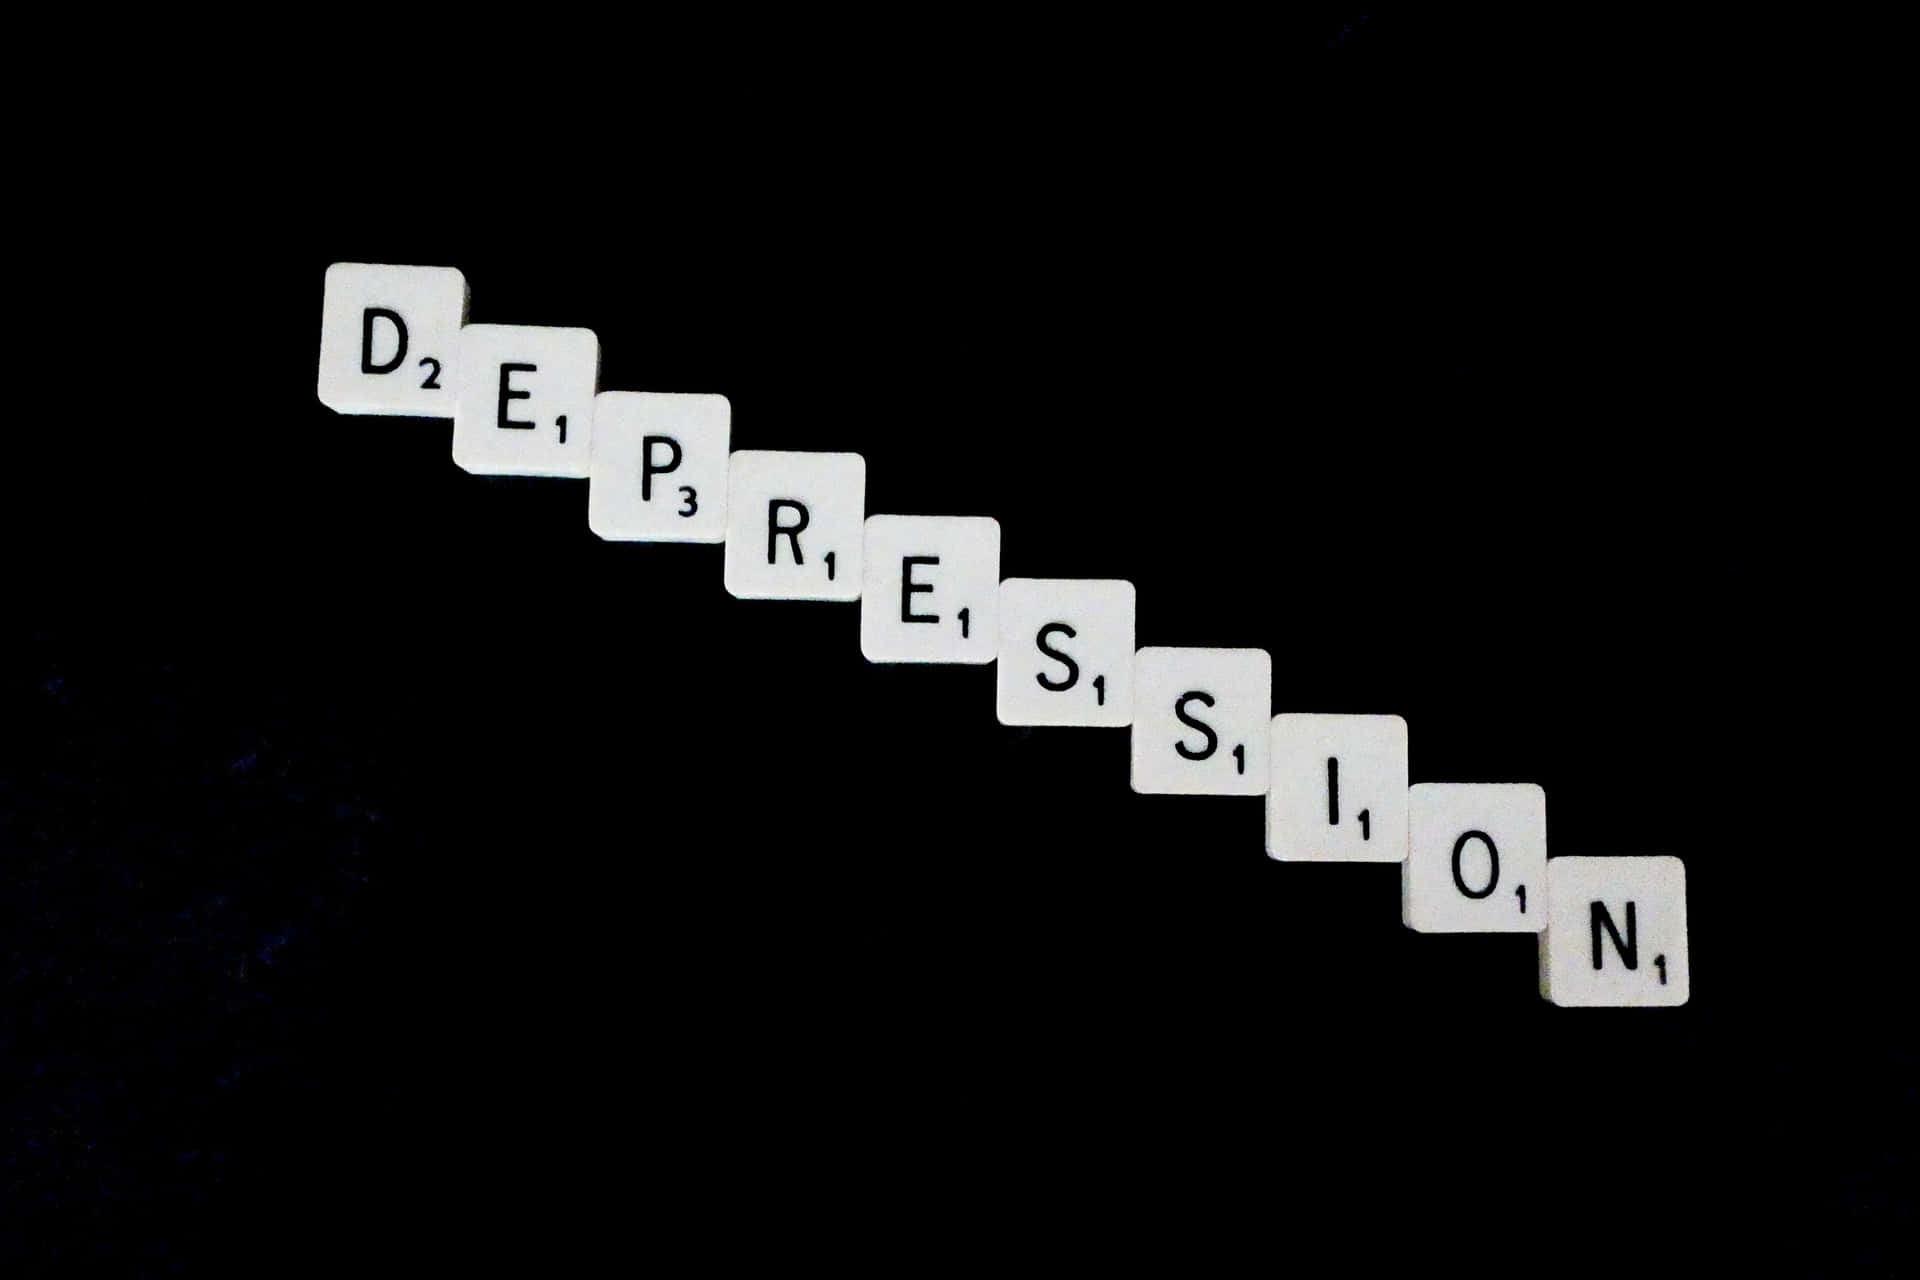 Feeling stuck in a cycle of depression